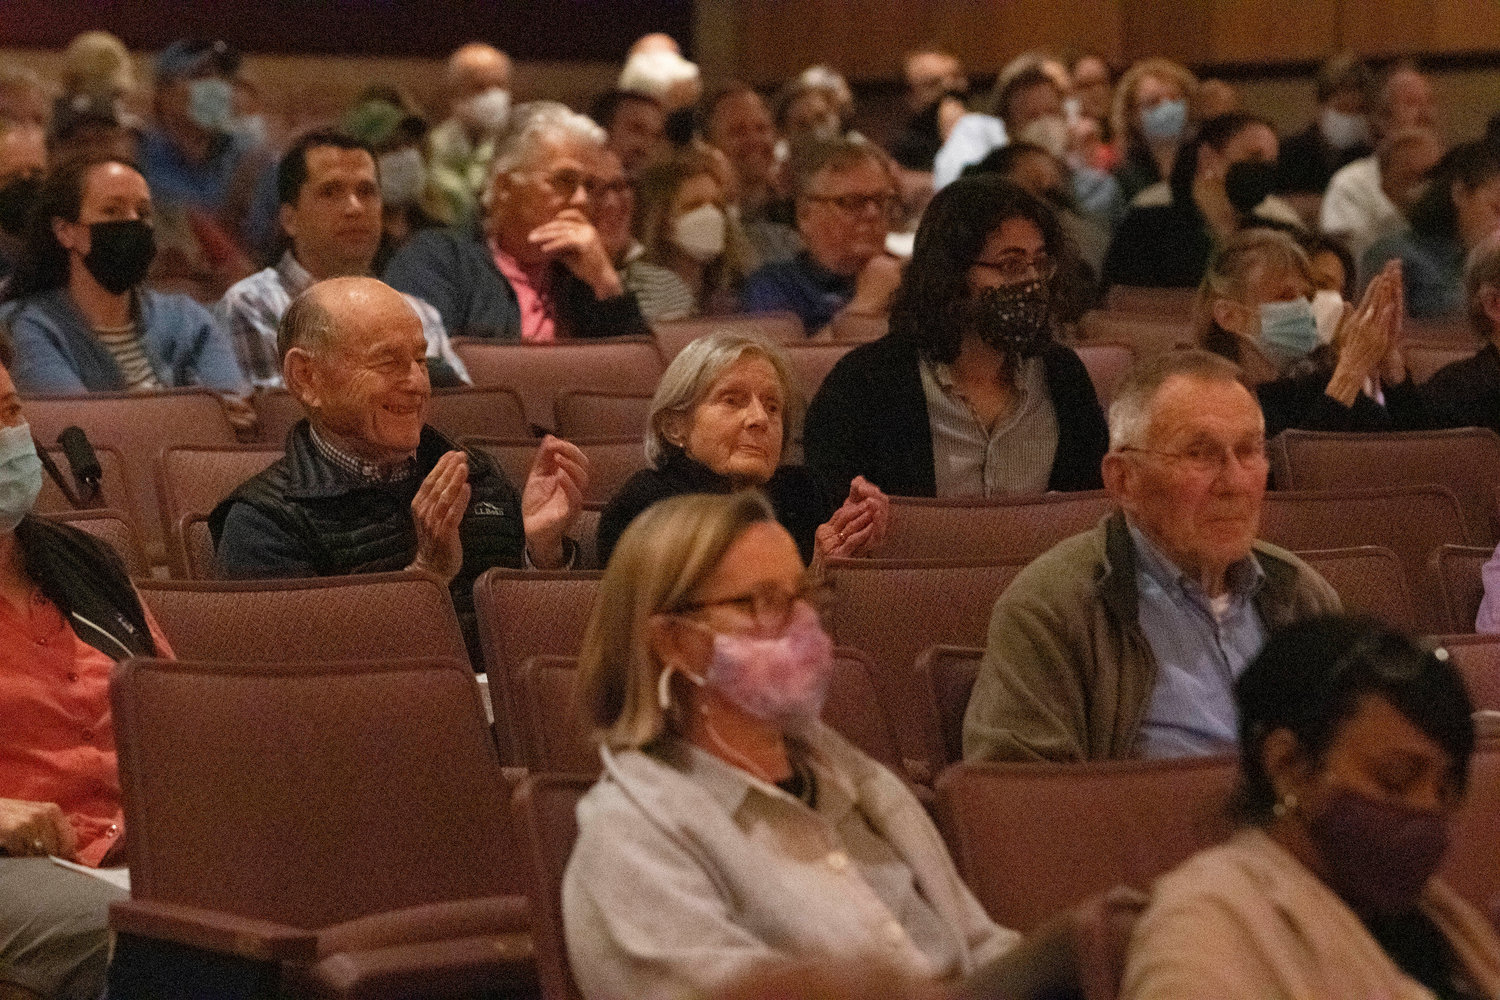 Audience members listen to speakers during Wednesday's FTM.